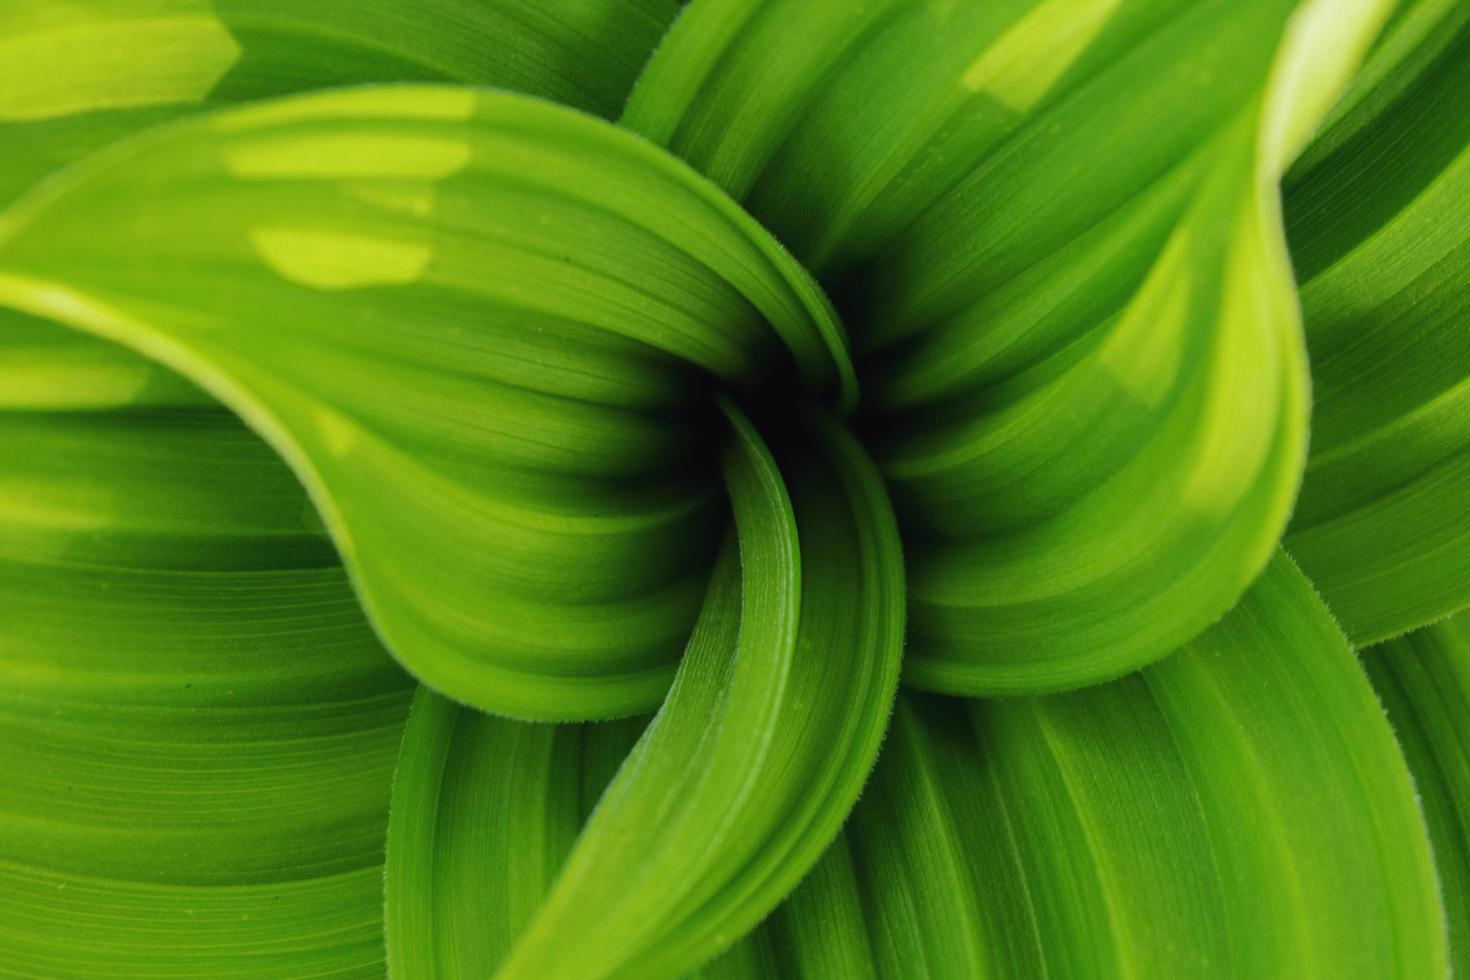 Natural background of fresh green leaves swirling in a spiral. photo